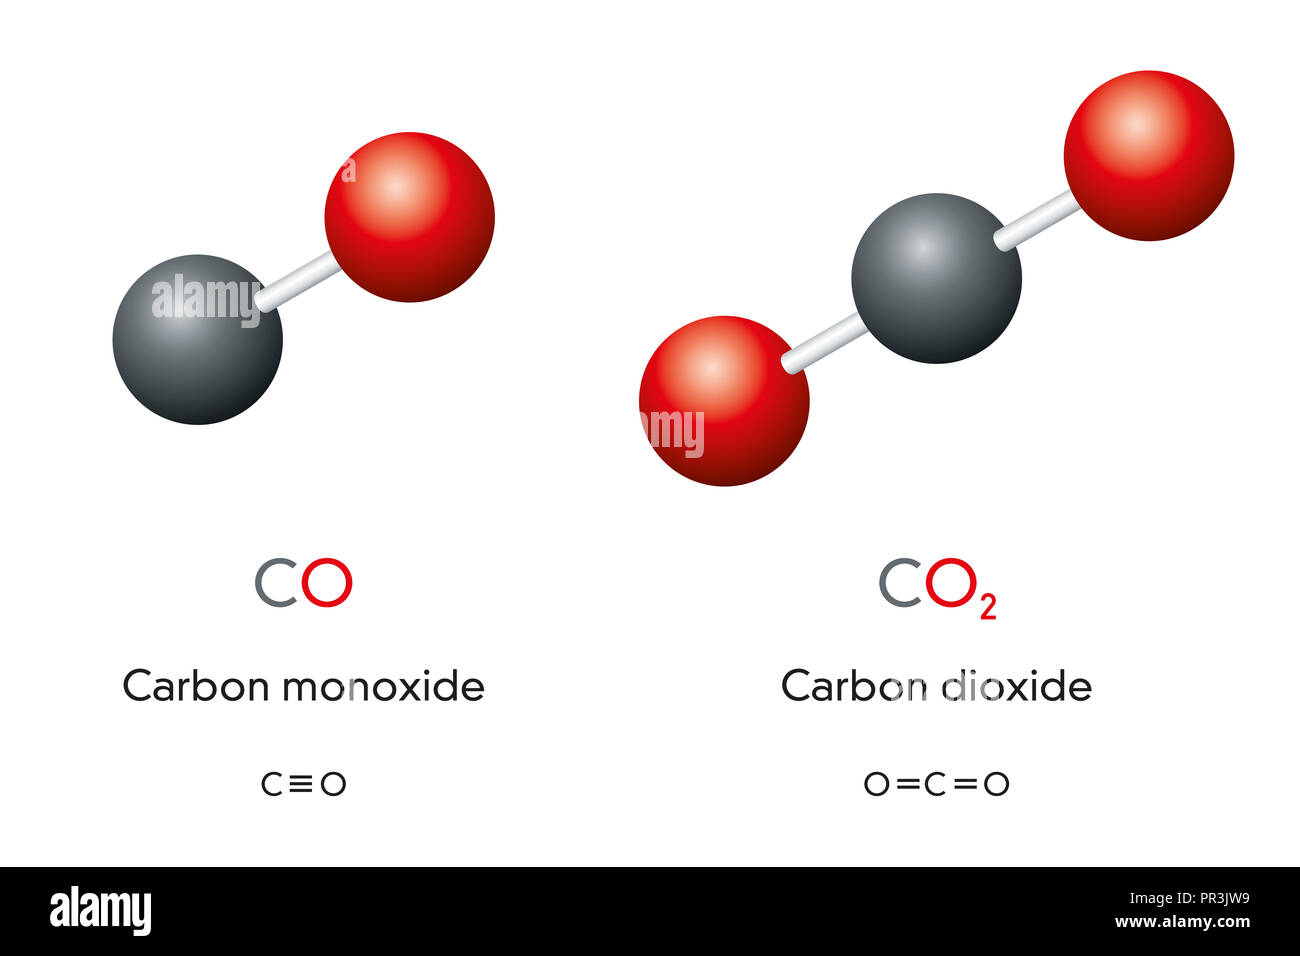 Carbon monoxide CO and carbon dioxide CO2 molecule models and chemical formulas. Gas. Ball-and-stick models, geometric structures and formulas. Stock Photo